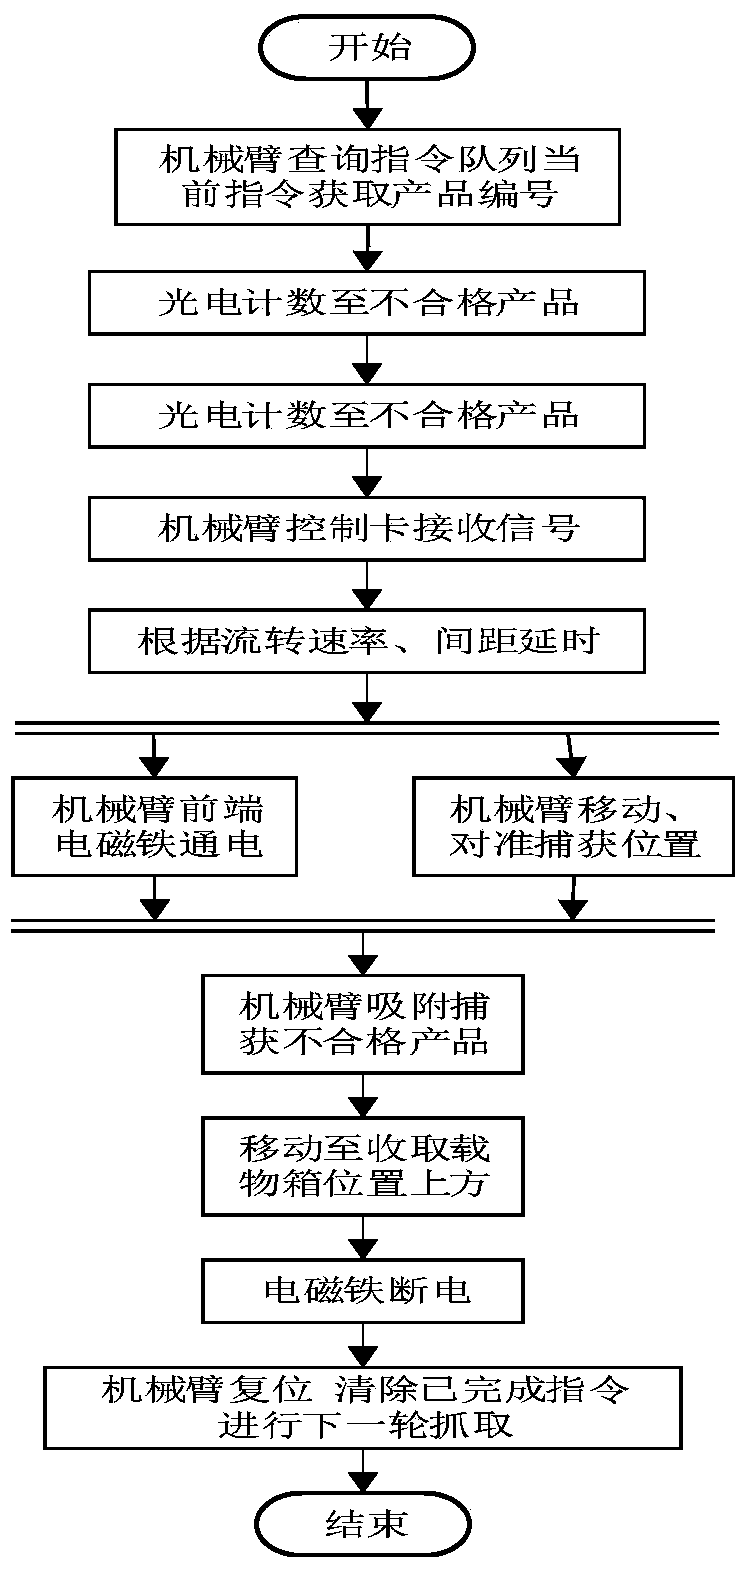 Method for automatic detection of complex product quality based on cloud platform